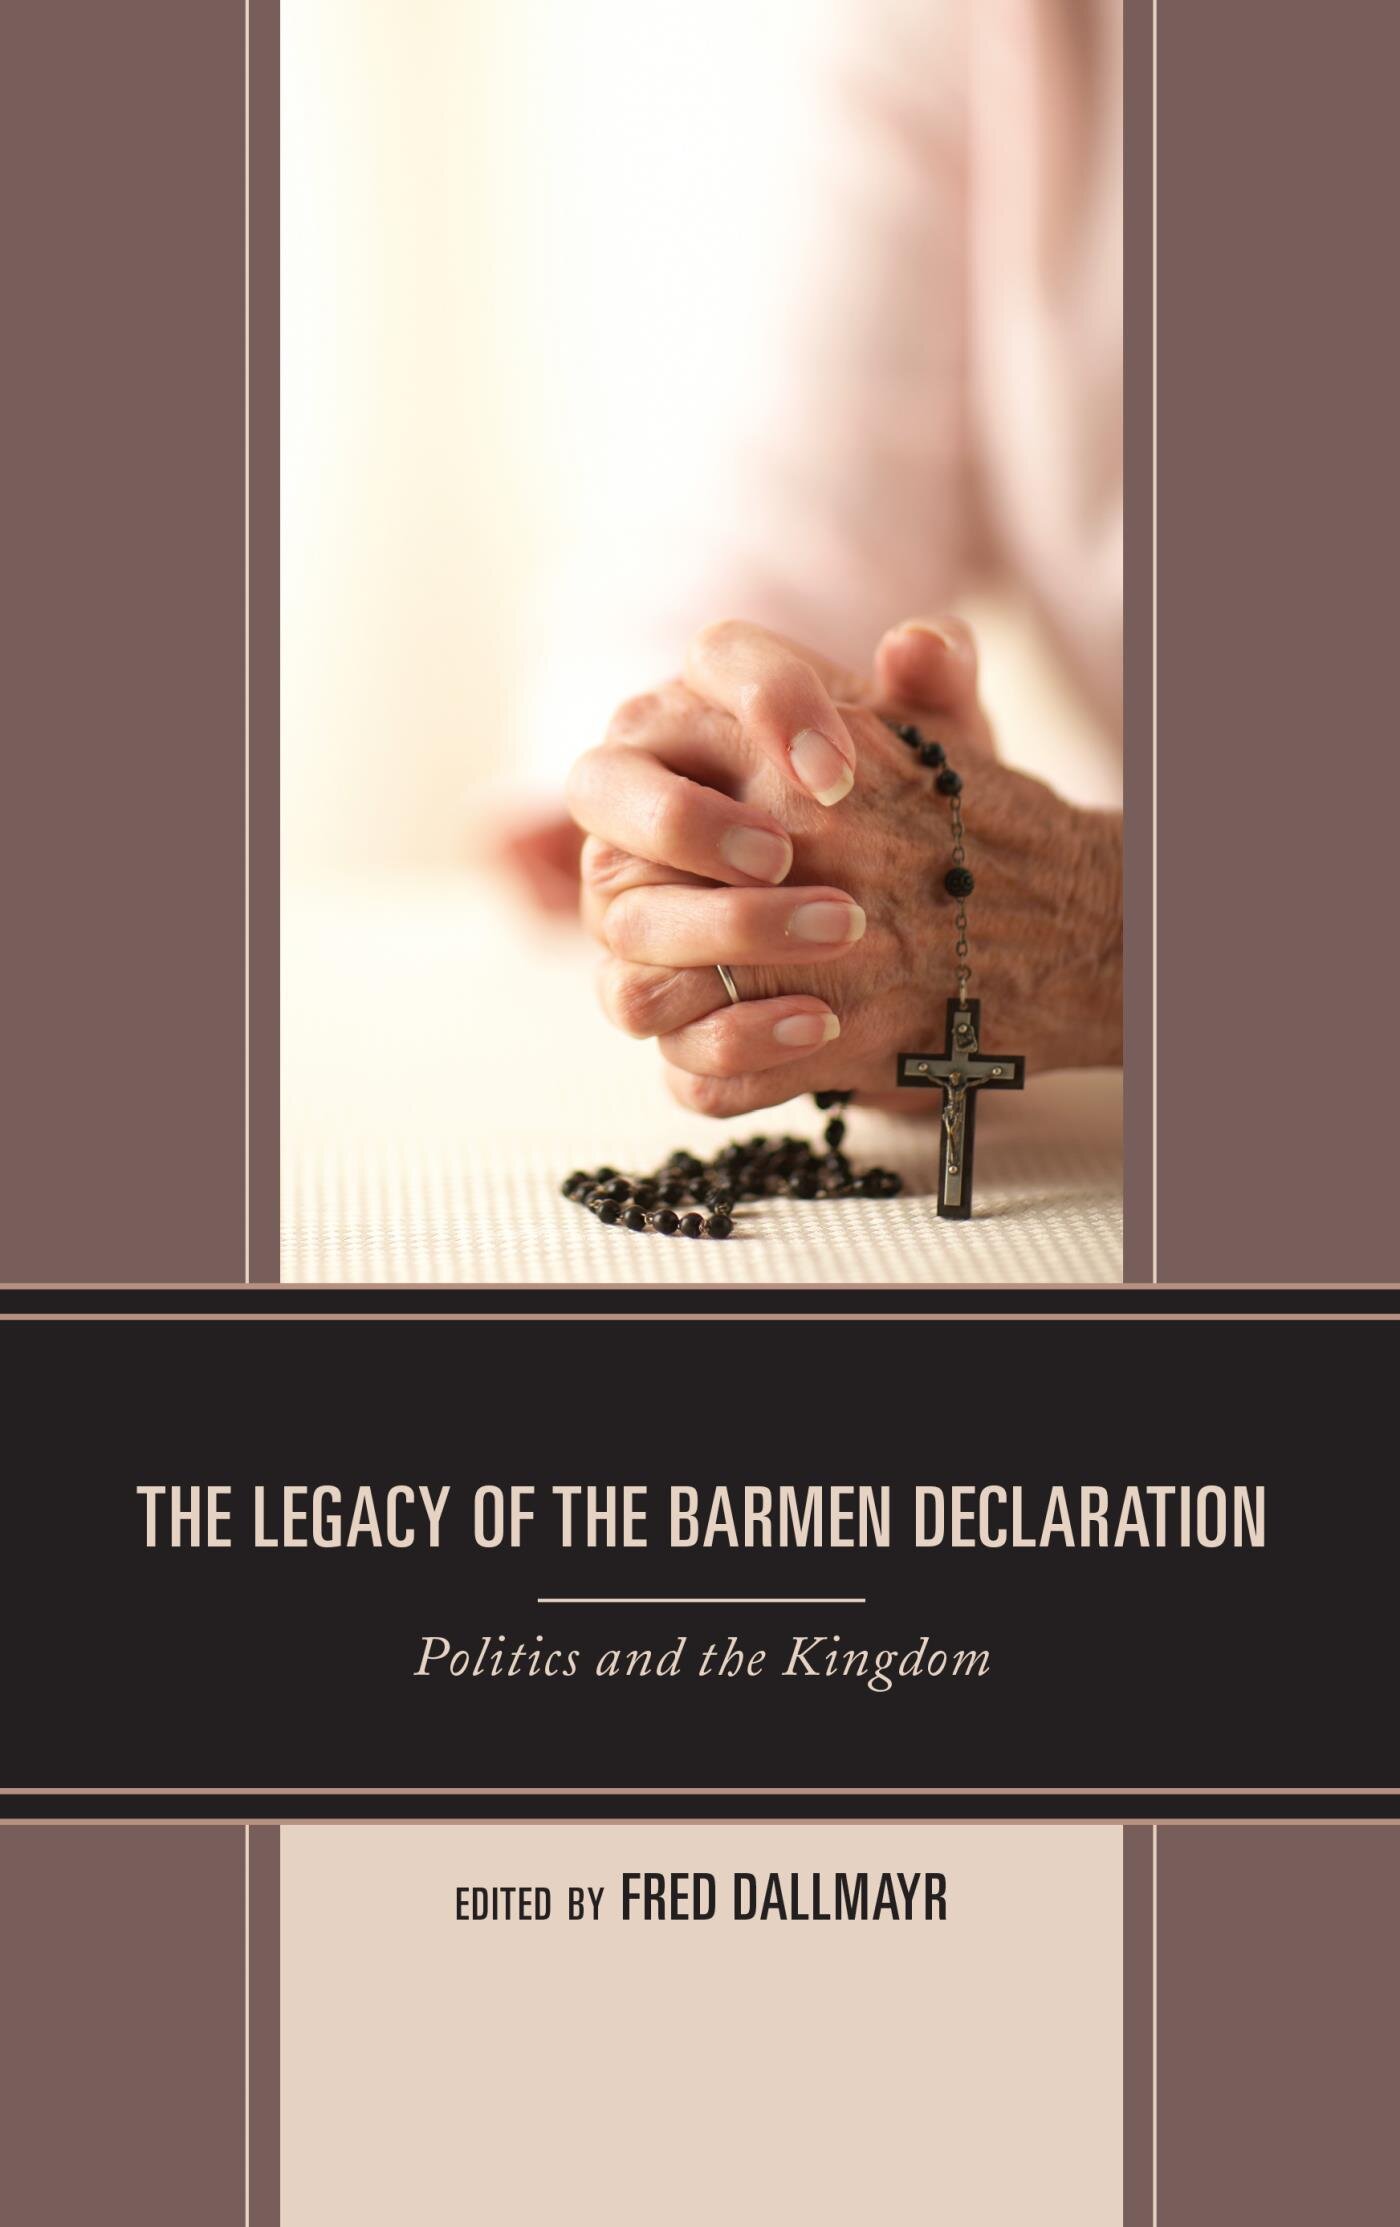 The Legacy of the Barmen Declaration: Politics and the Kingdom